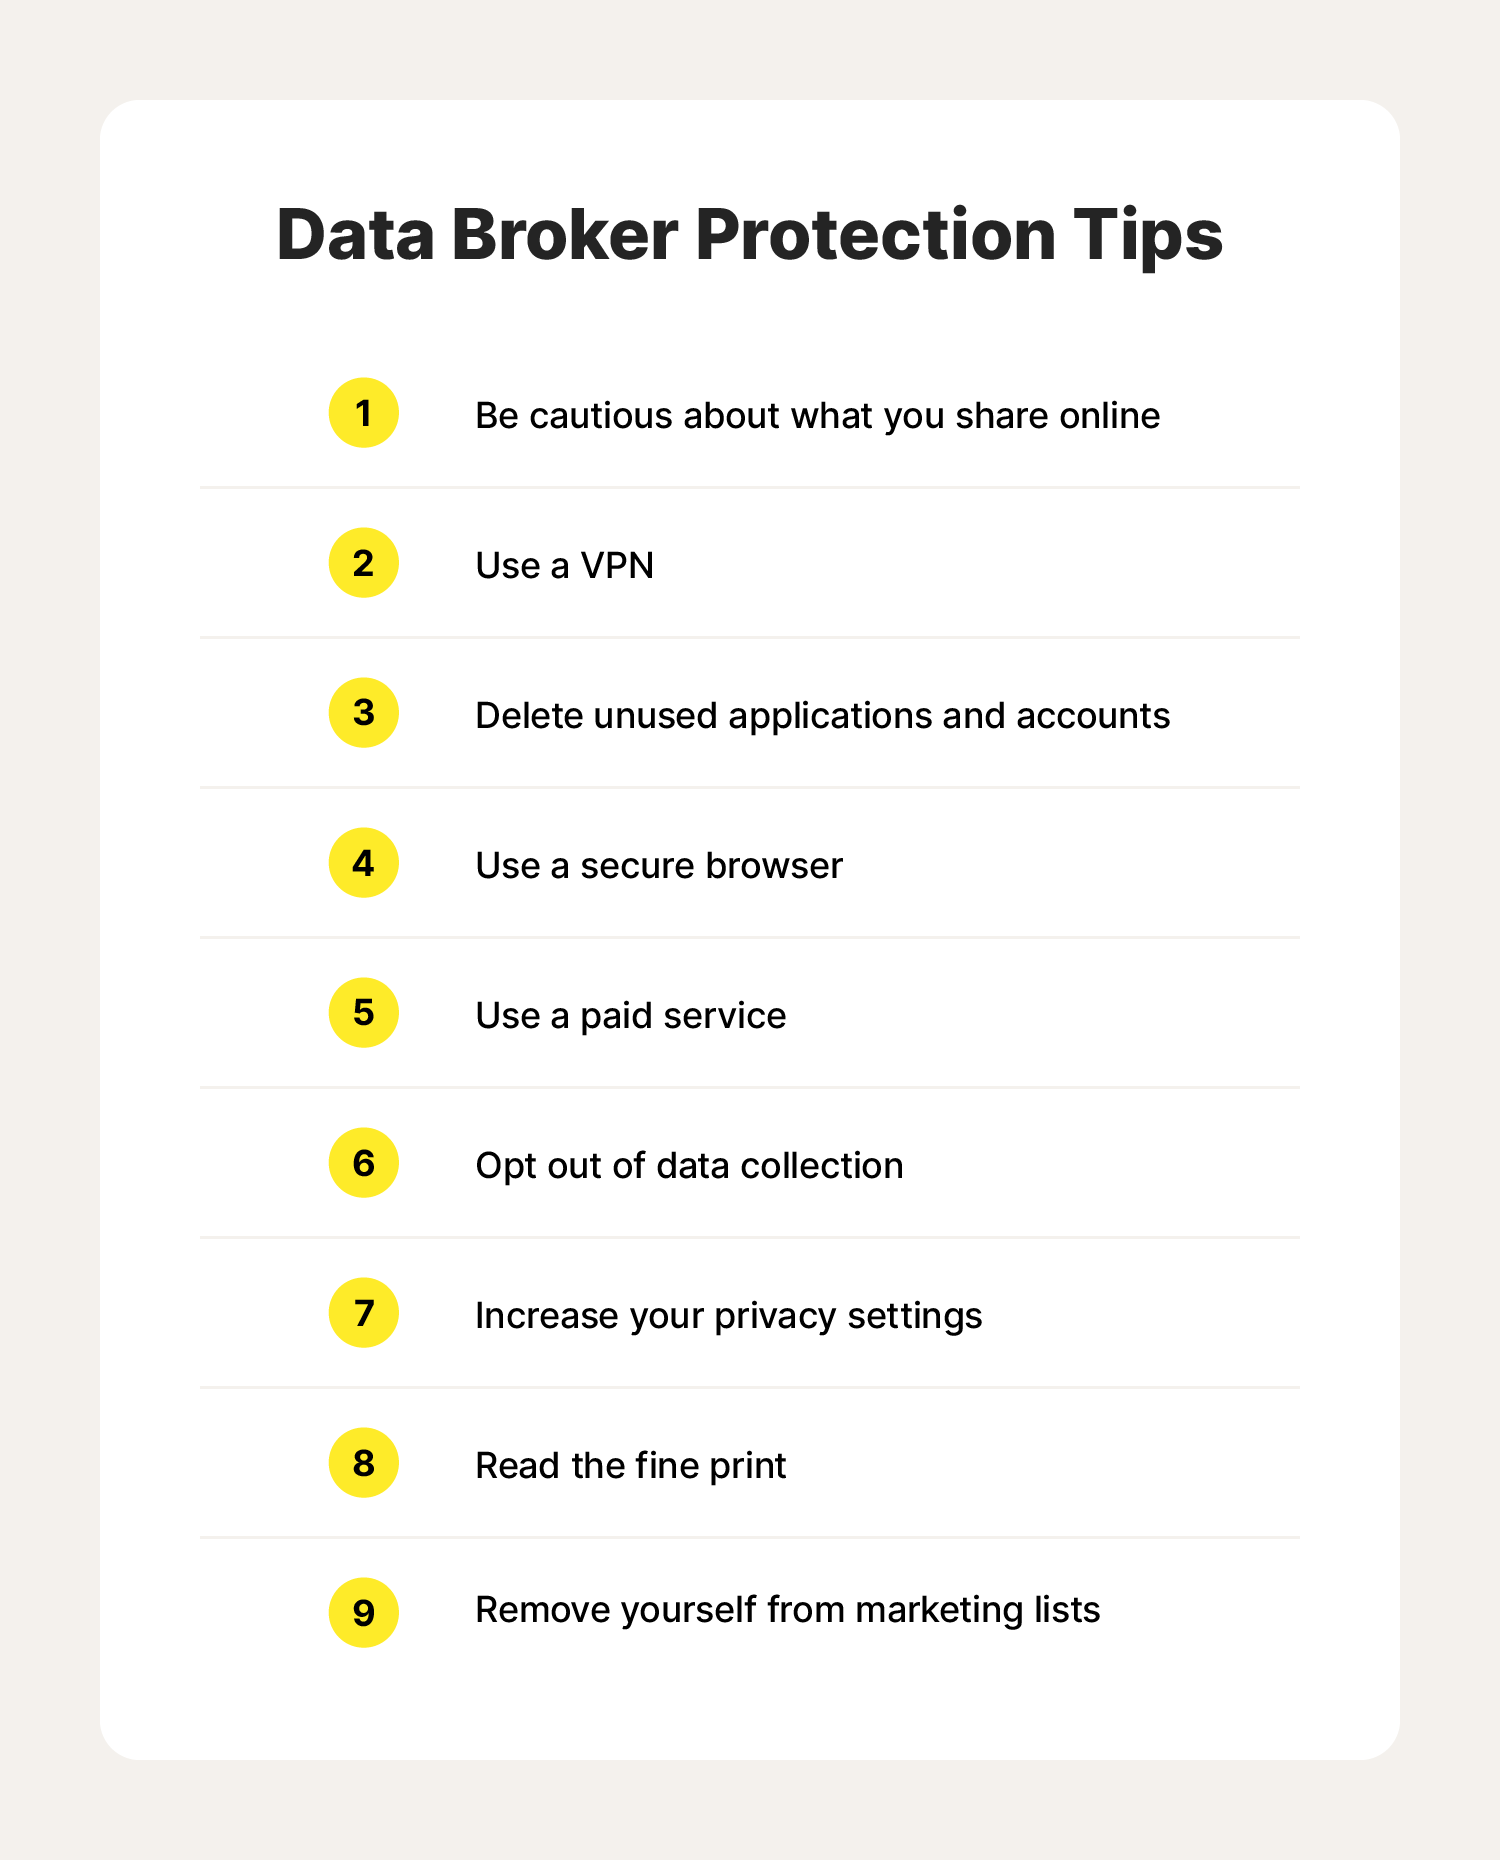 A graphic showcases tips to help protect your data from data brokers.